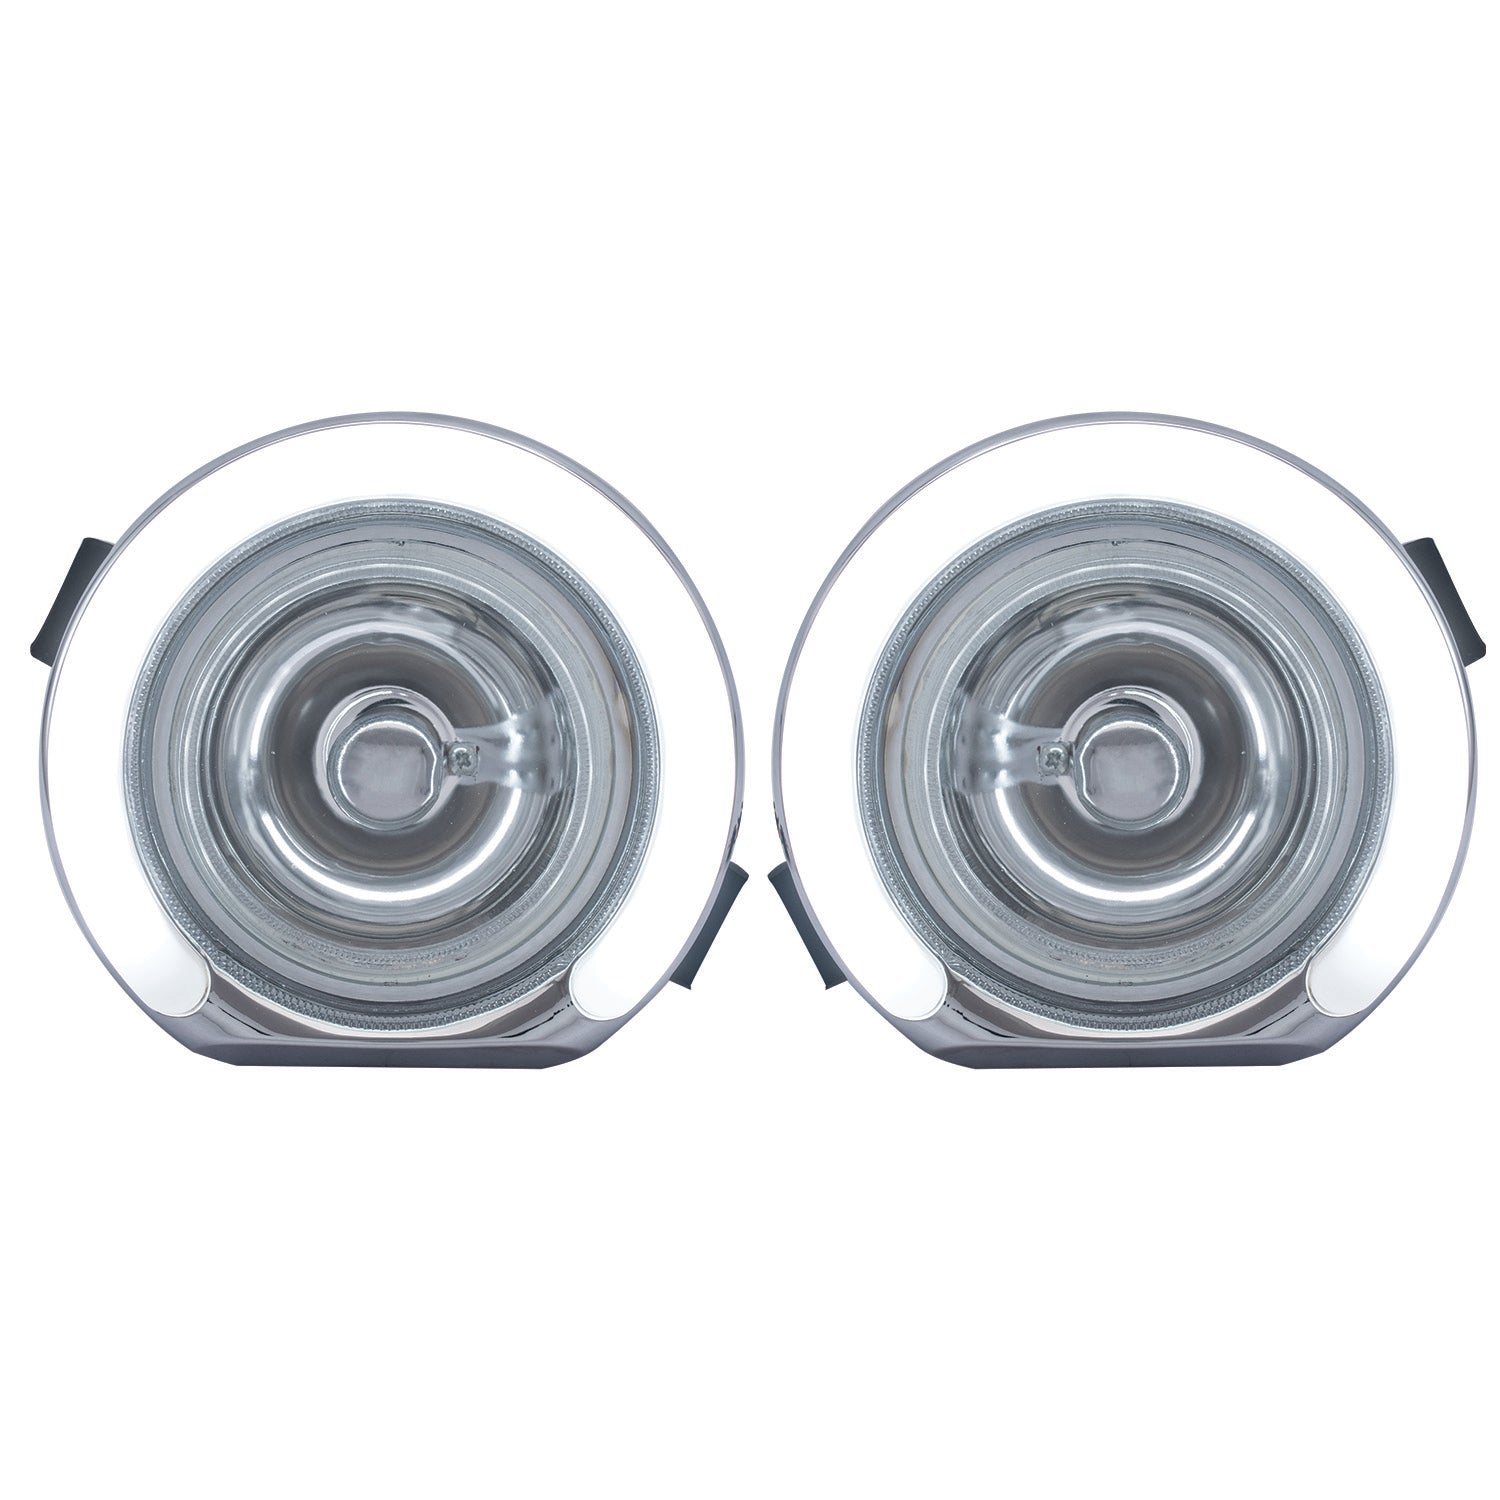 Blackcat Bolero Fog lamp with DRL (Set of 2) With Wiring Harness & Switch; High Power LED